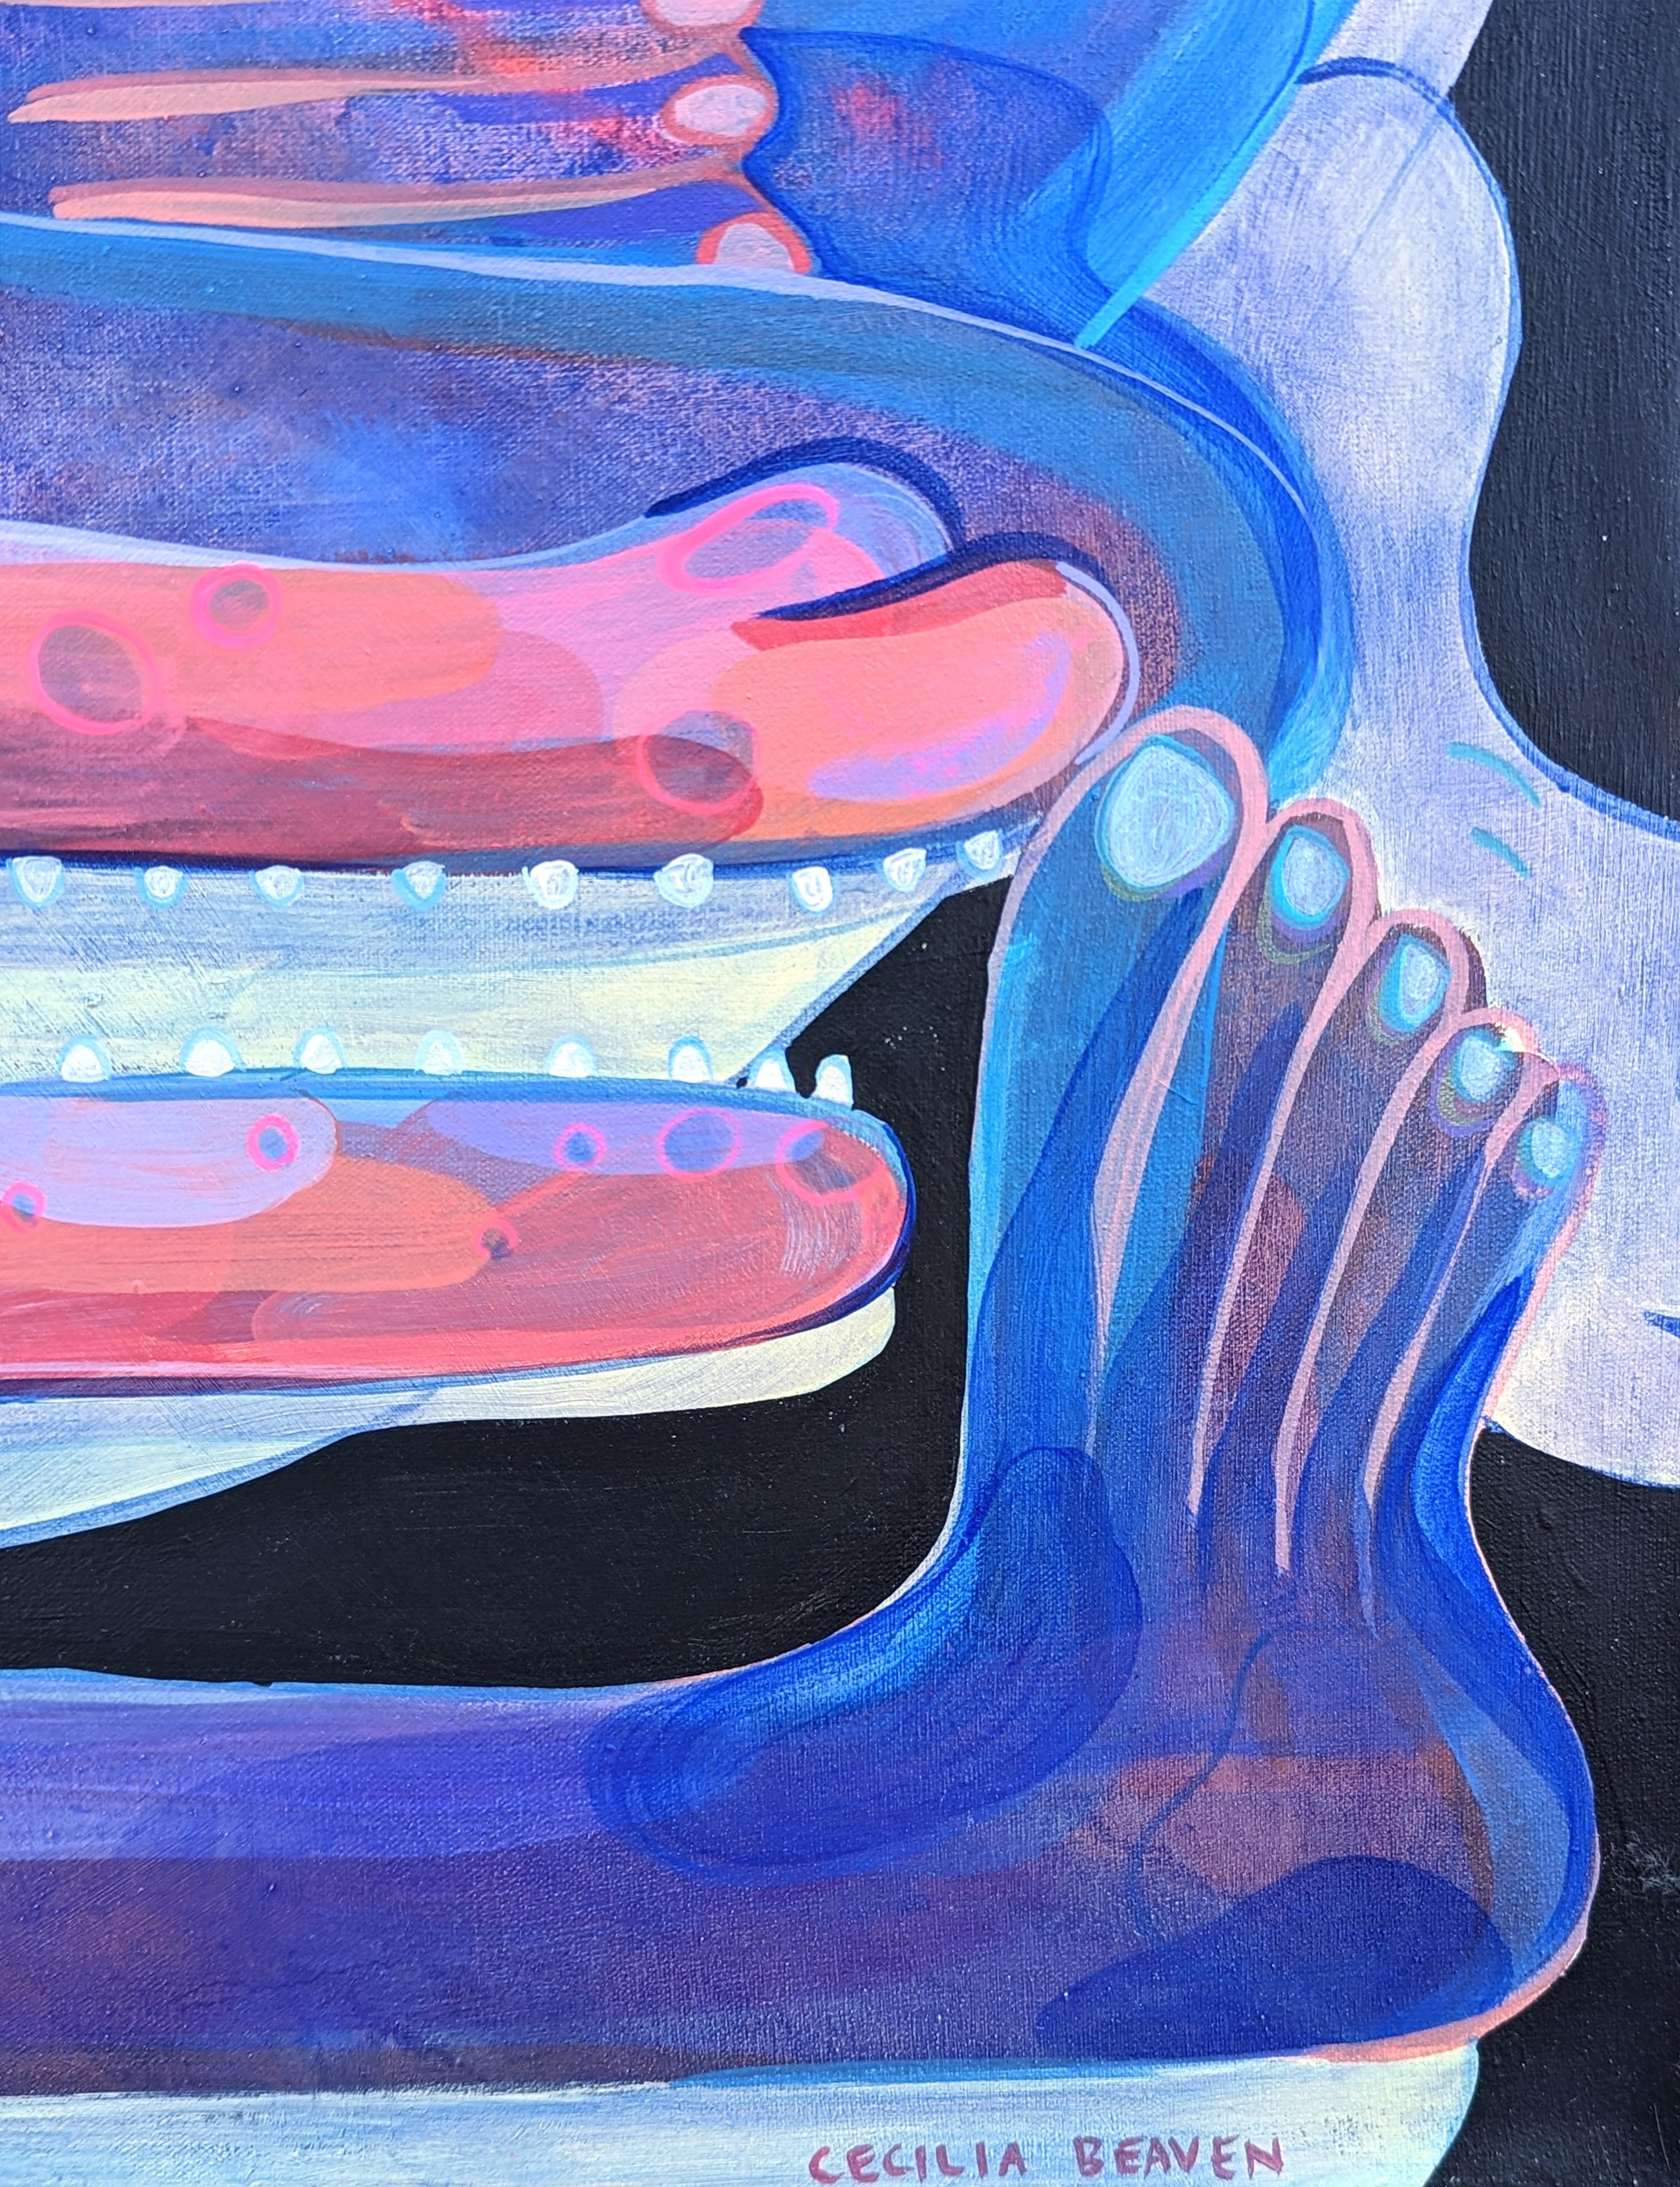 Contemporary pink and blue toned abstract painting by Chicago-based artist Cecilia Beaven. The work features a contorted crocodile or alligator inspired figure. Cecilia Beaven draws upon her early life in Mexico City as well as her own personal